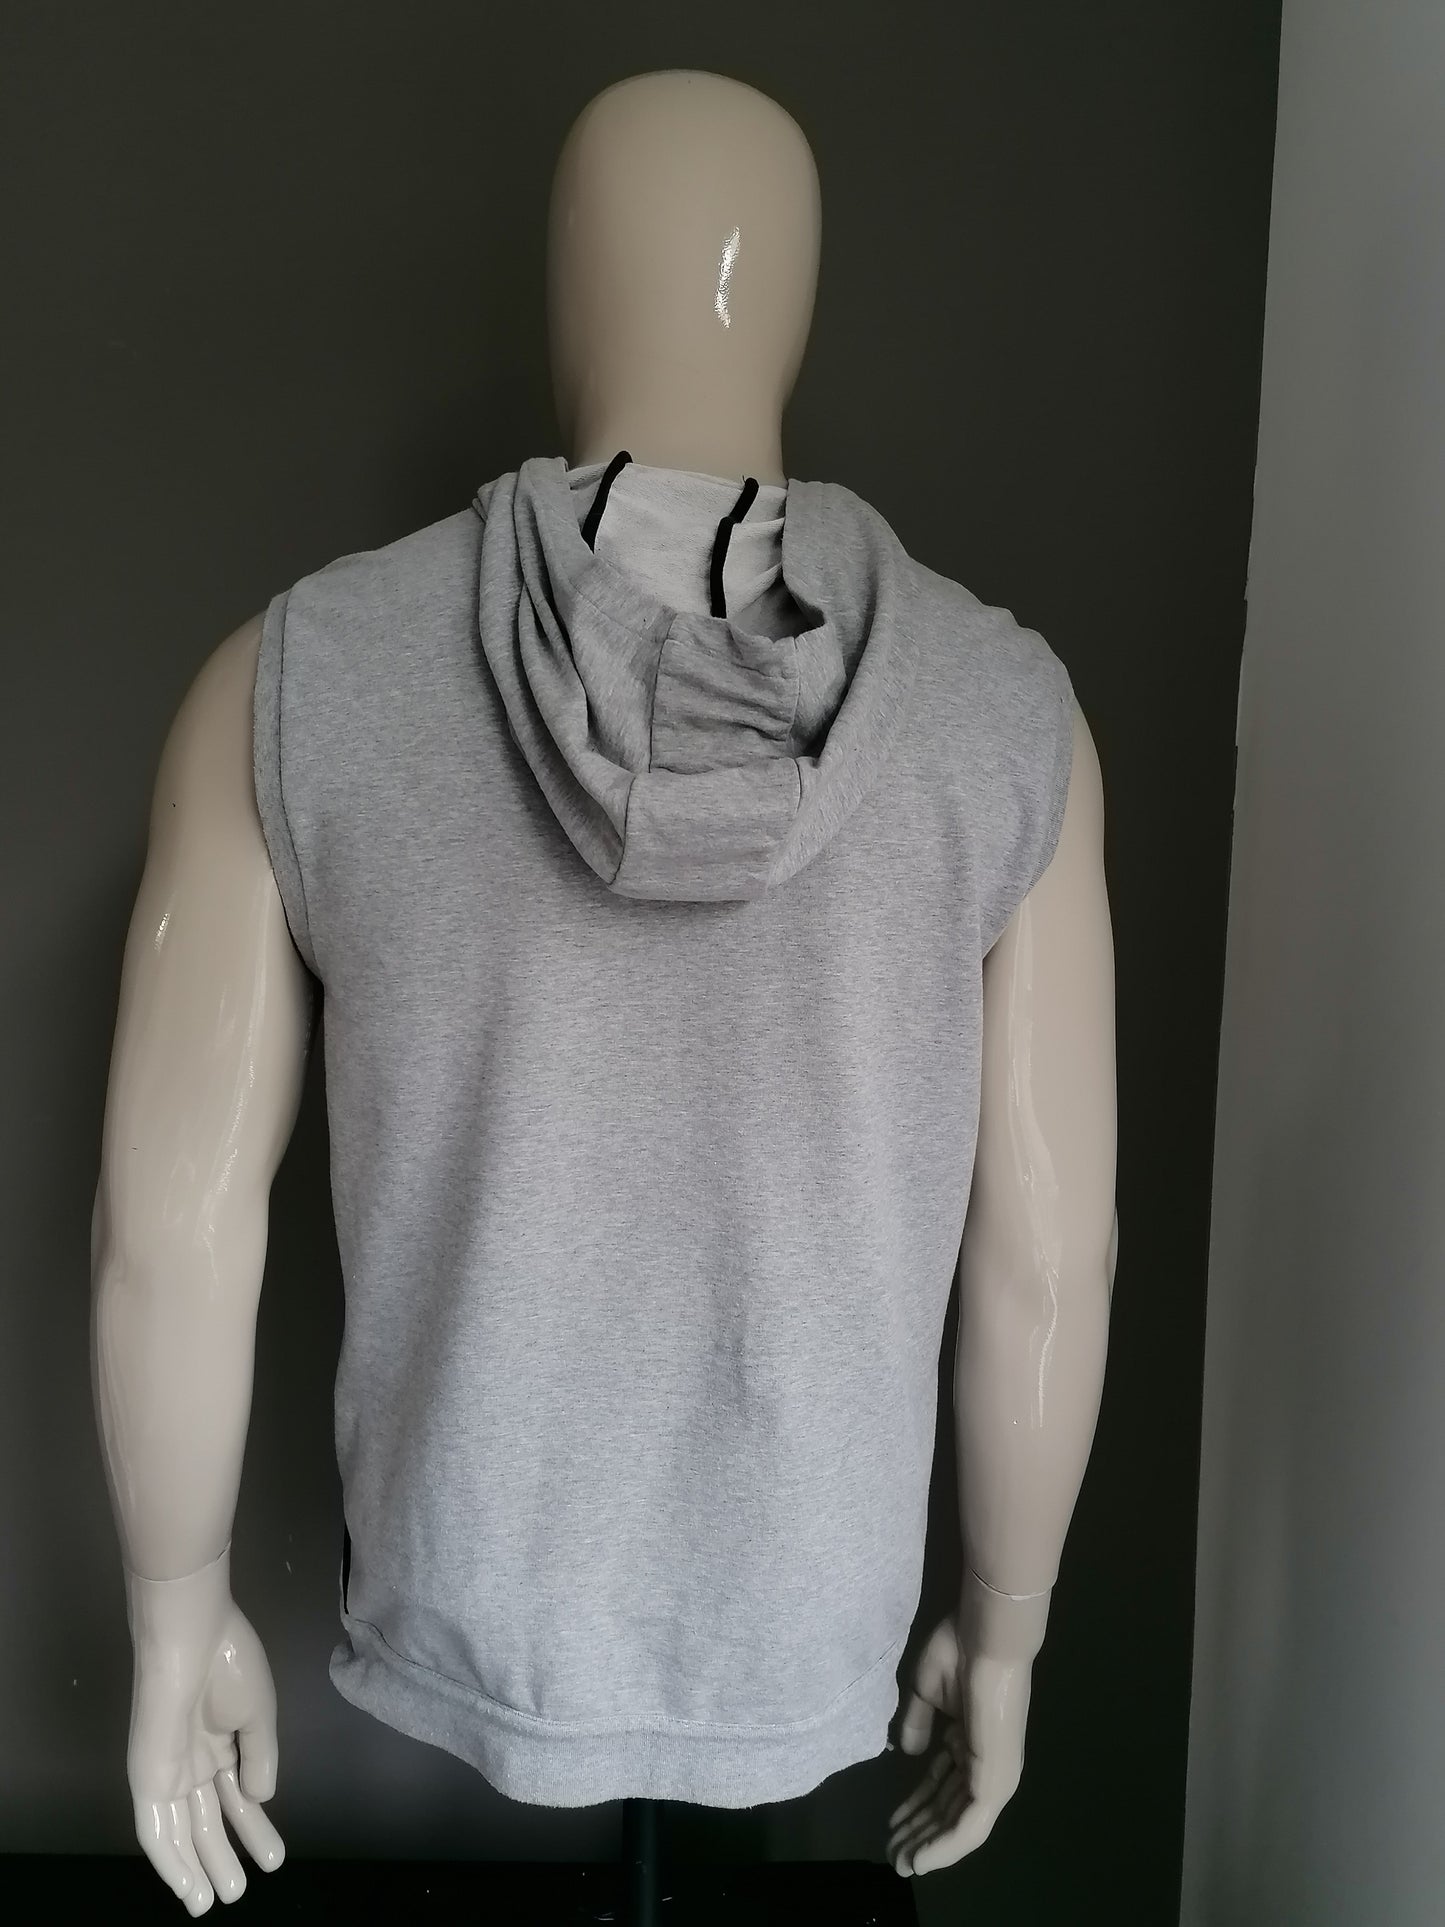 Armani Exchange body warmer with hood. Gray colored. Size L. Sweat fabric.